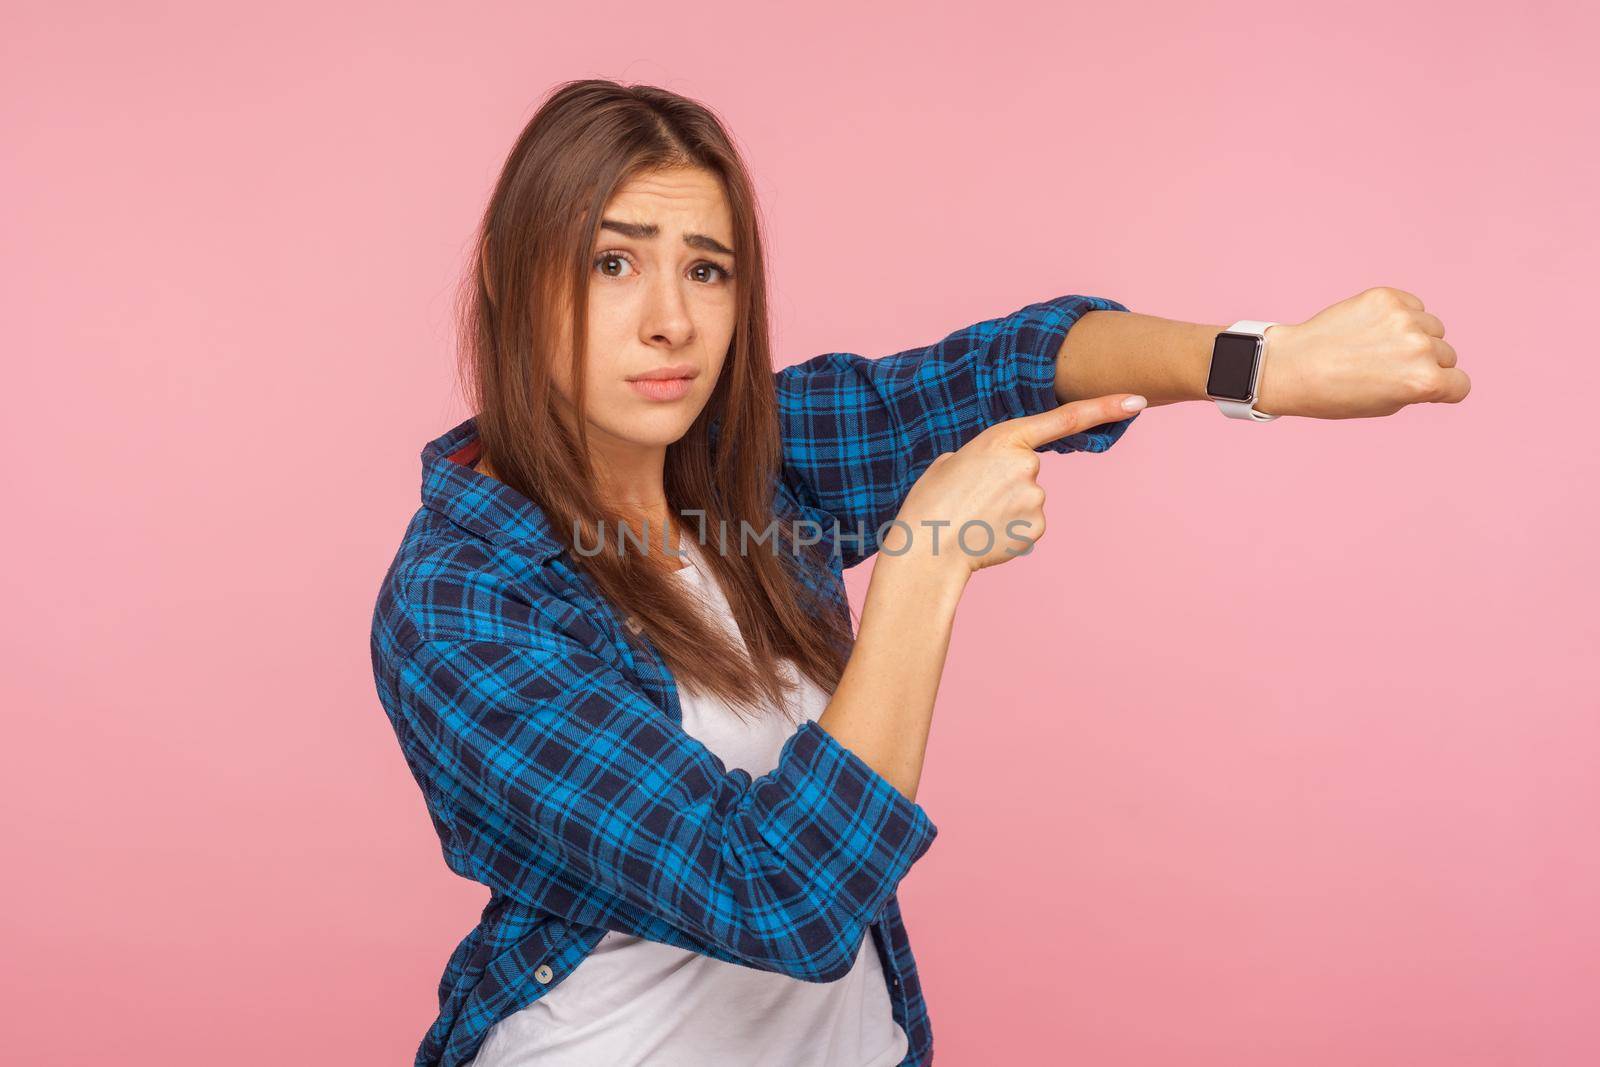 It's late. Portrait of impatient young woman in checkered shirt pointing at wrist watches checking time and looking worried, dissatisfied with delay. indoor studio shot isolated on pink background